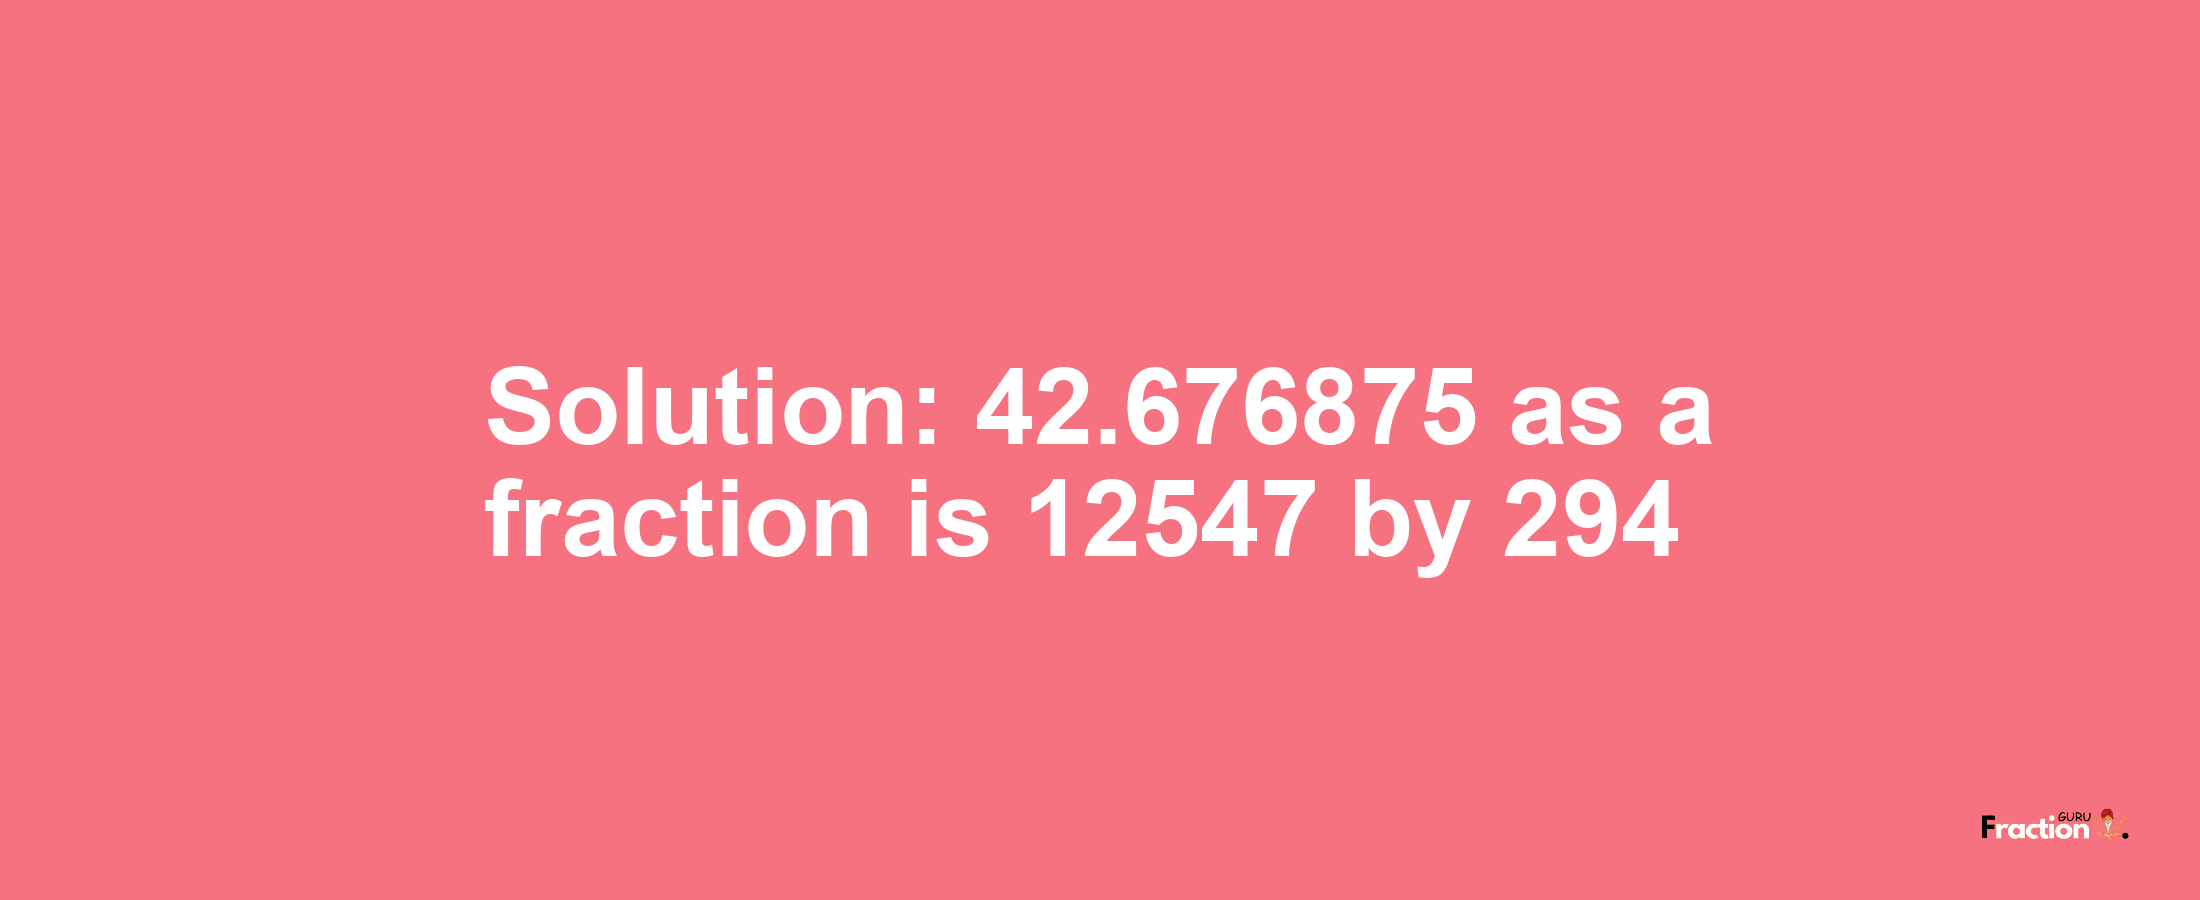 Solution:42.676875 as a fraction is 12547/294